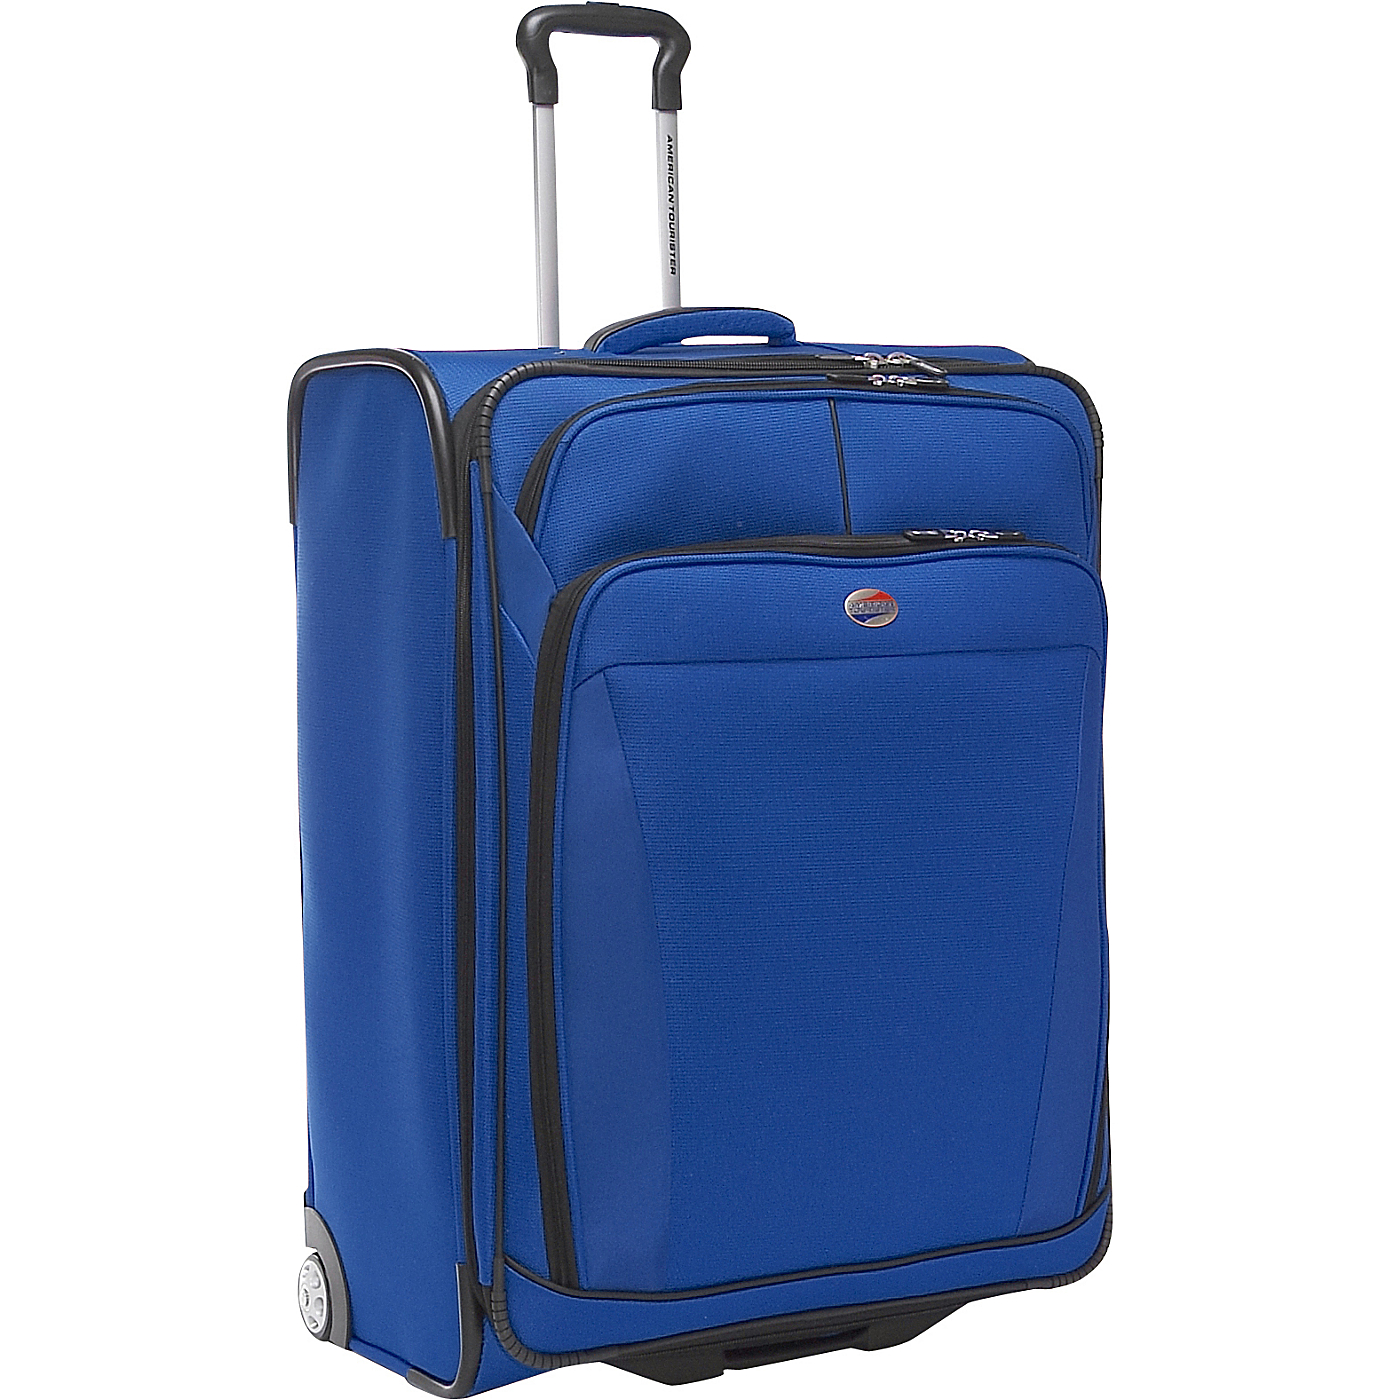 American Tourister Bags and Luggage  Save up to 65%   